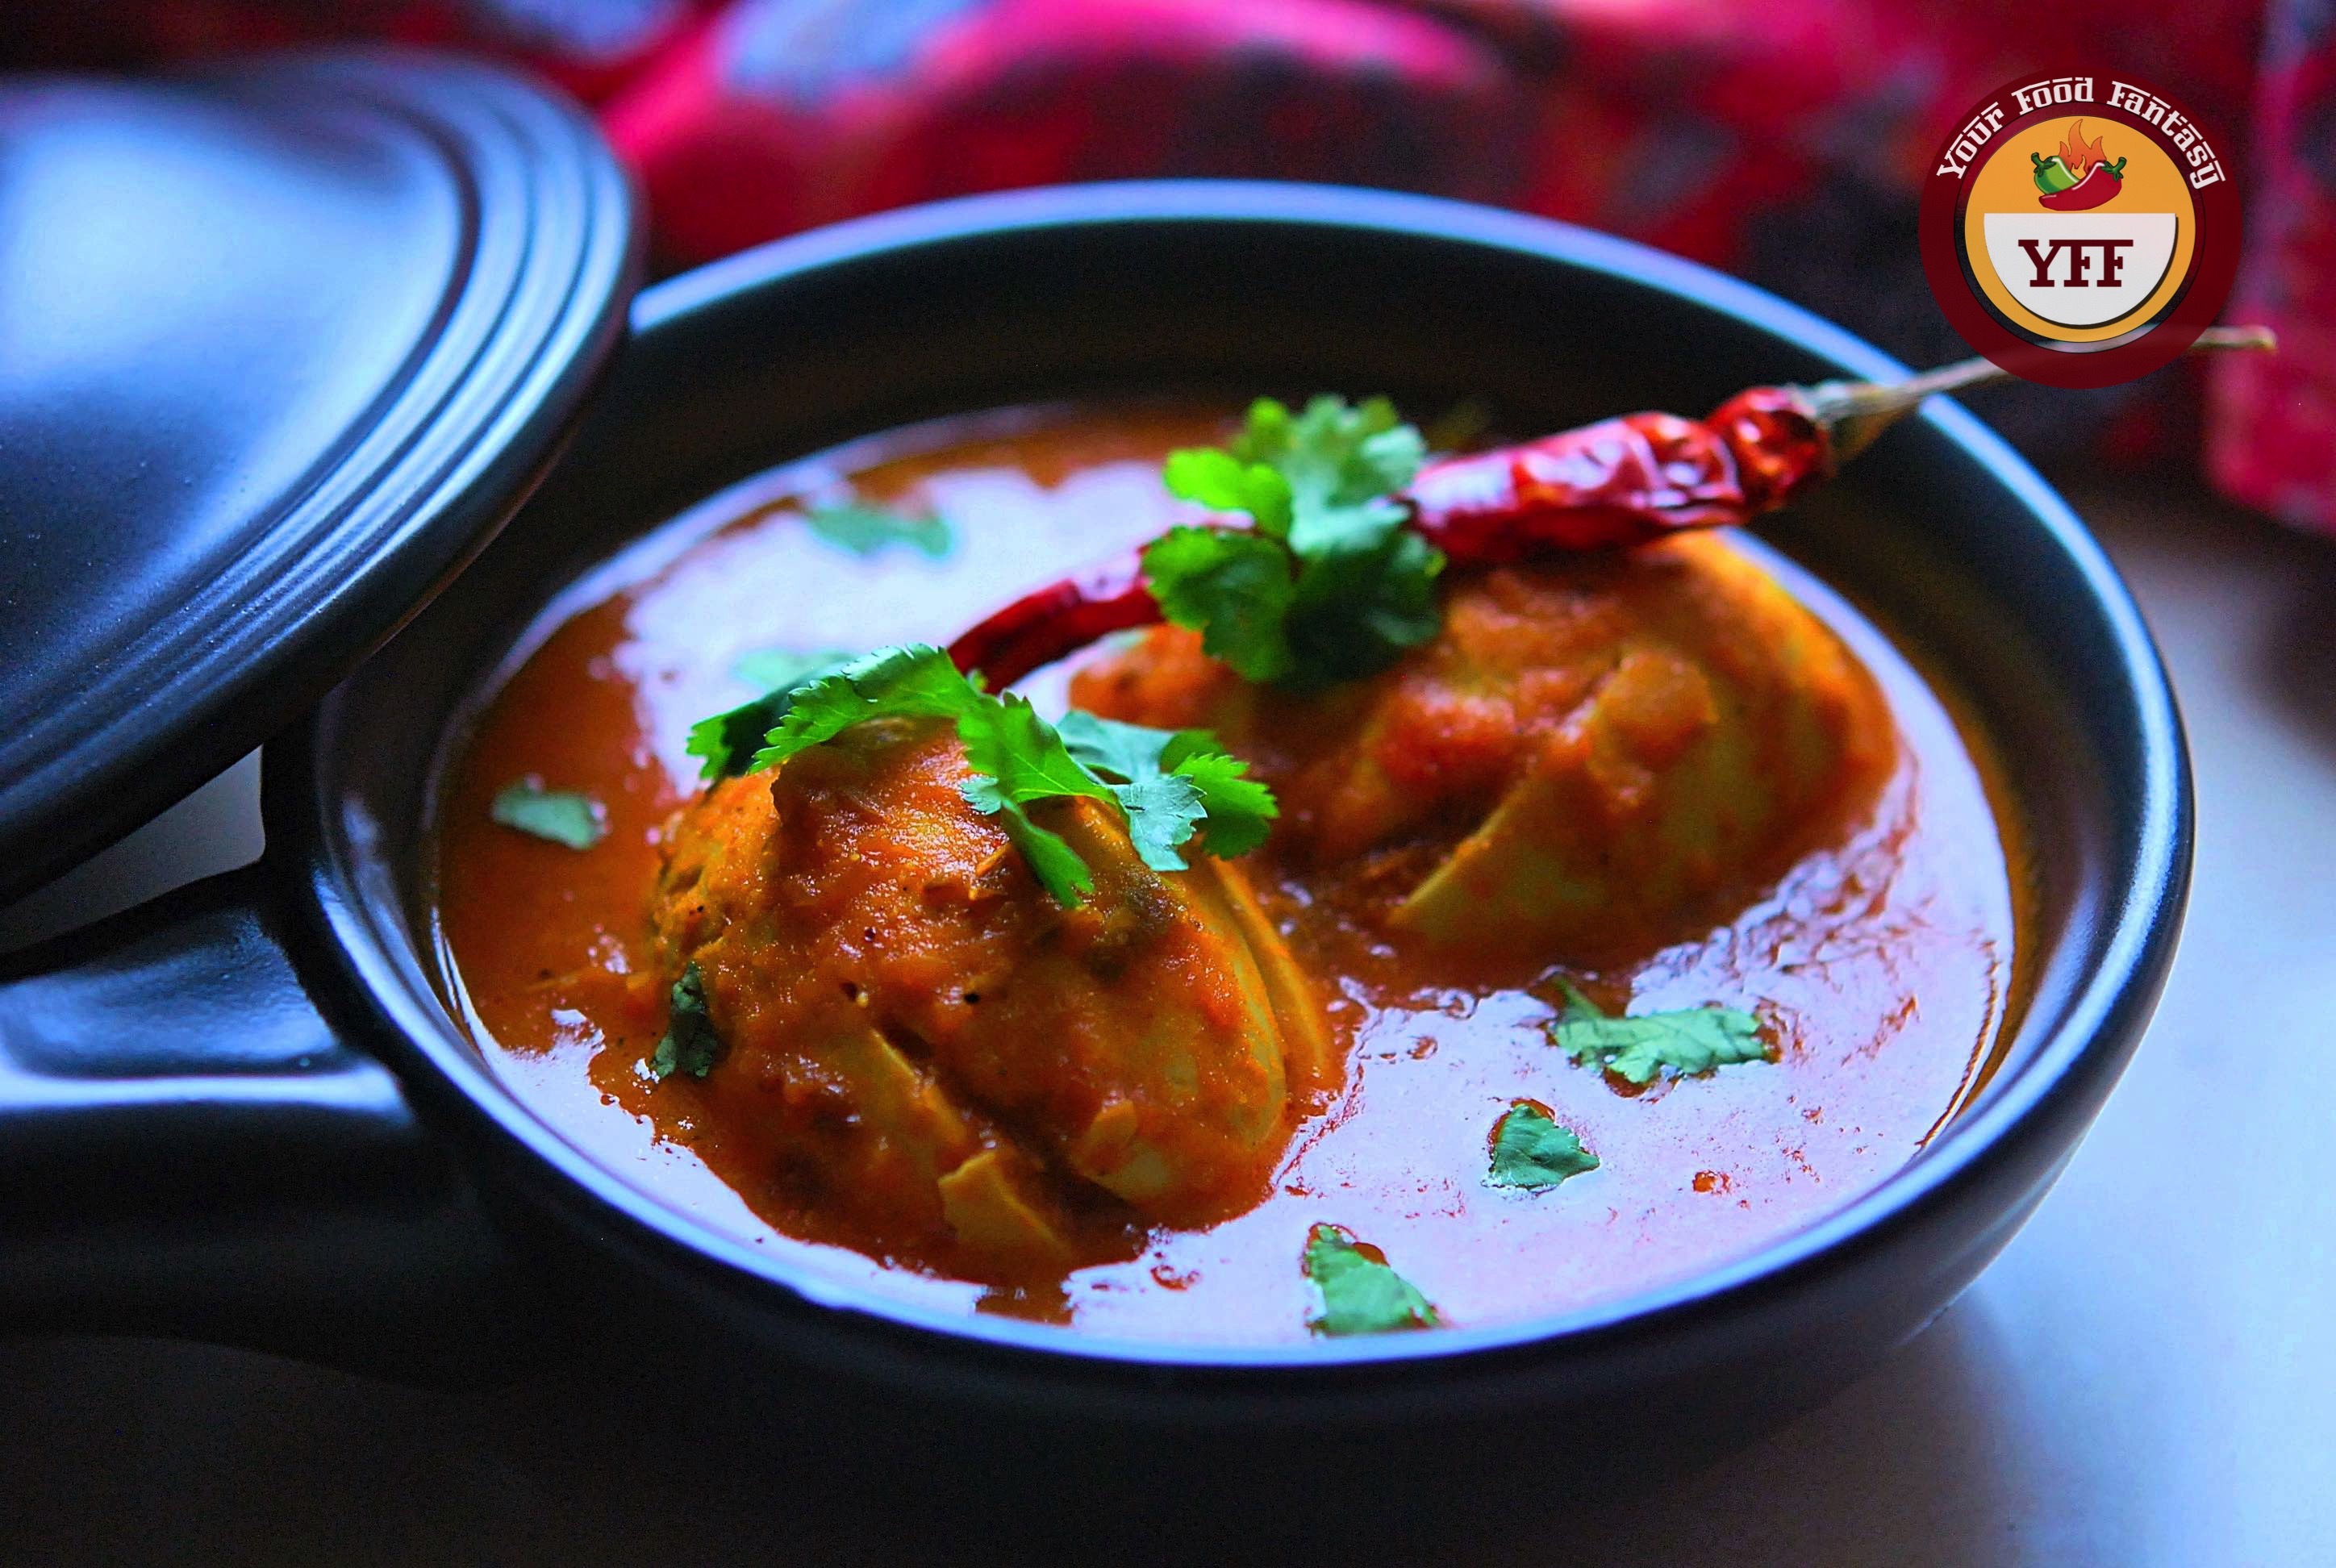 South Indian Egg Curry Recipe - Your Food Fantasy